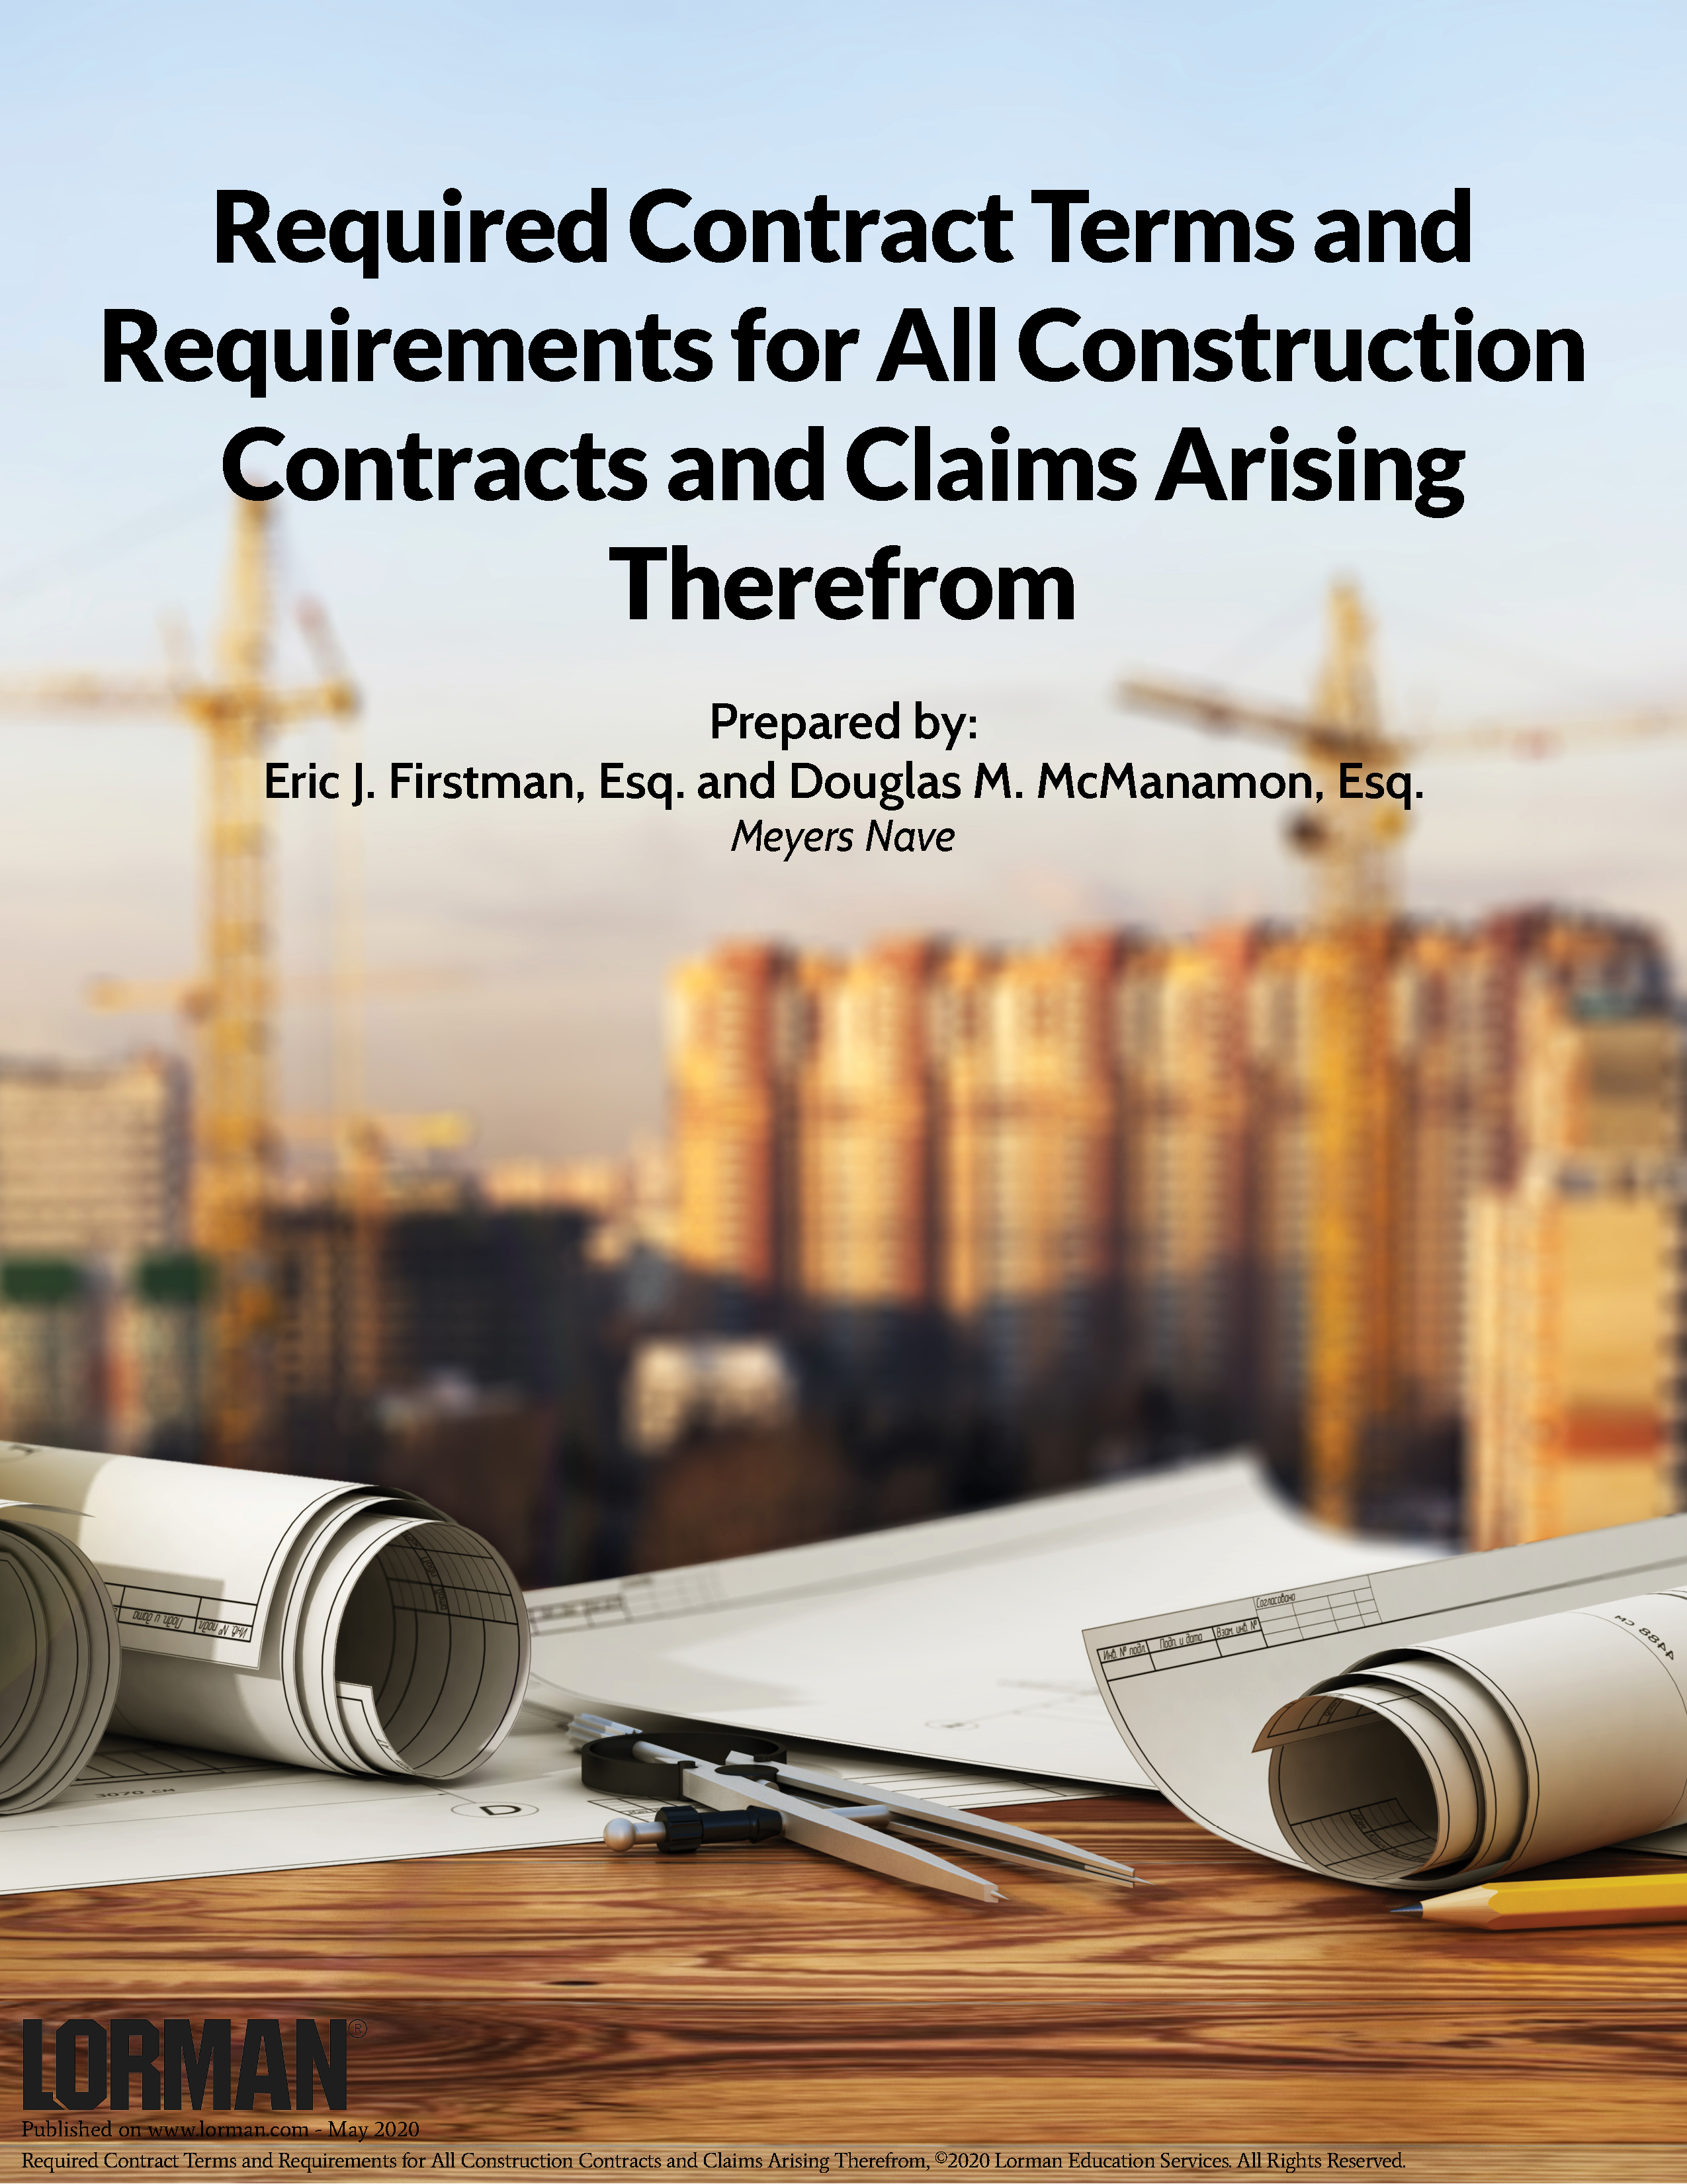 Required Contract Terms and Requirements for All Construction Contracts and Claims Arising Therefrom